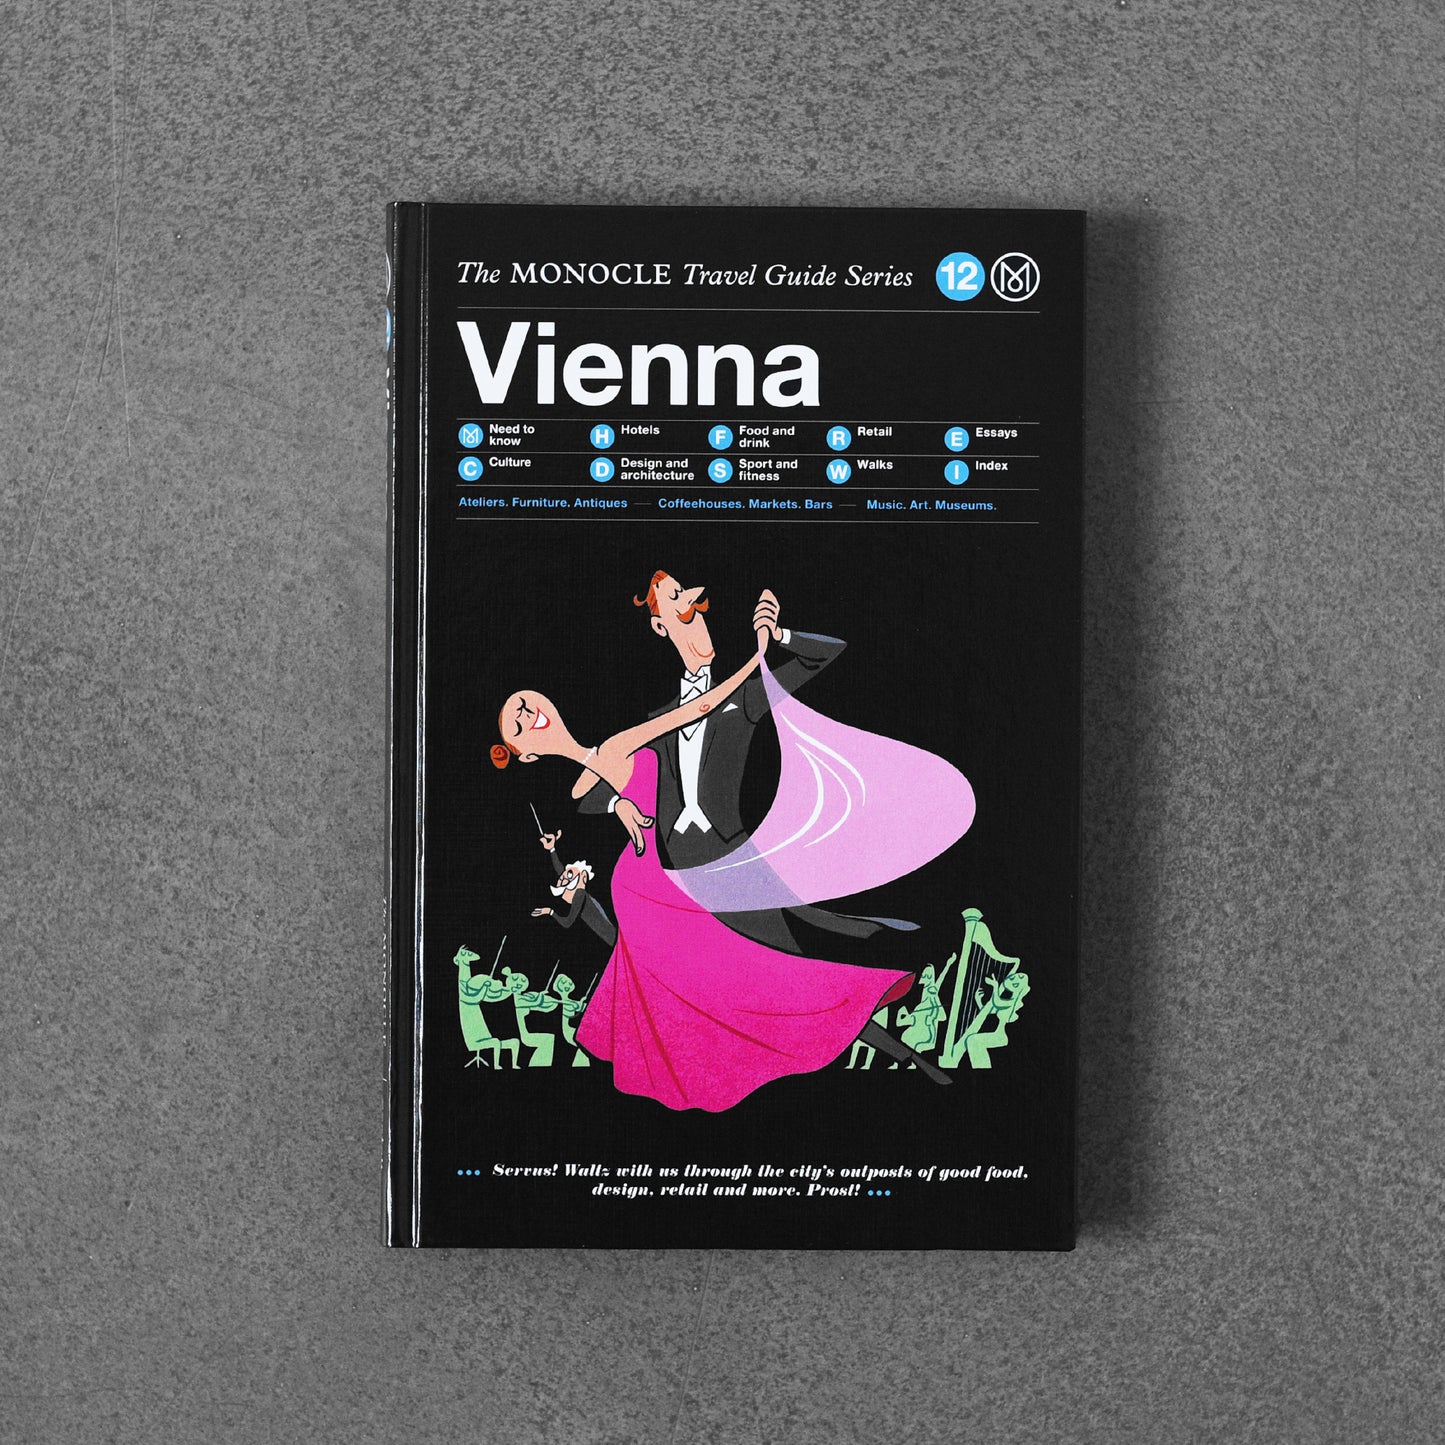 The Monocle Travel Guide Series Vienna